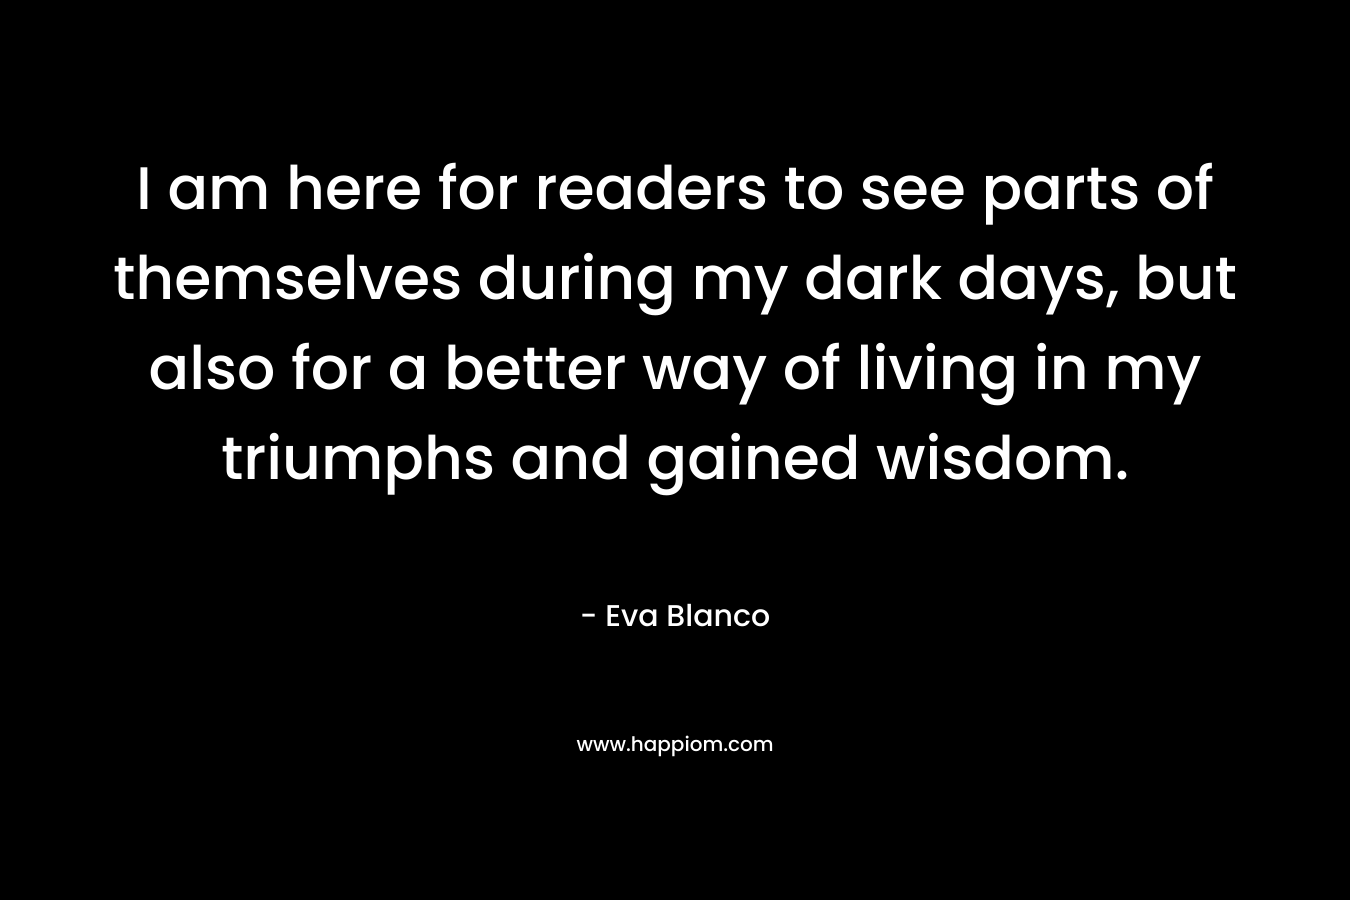 I am here for readers to see parts of themselves during my dark days, but also for a better way of living in my triumphs and gained wisdom.